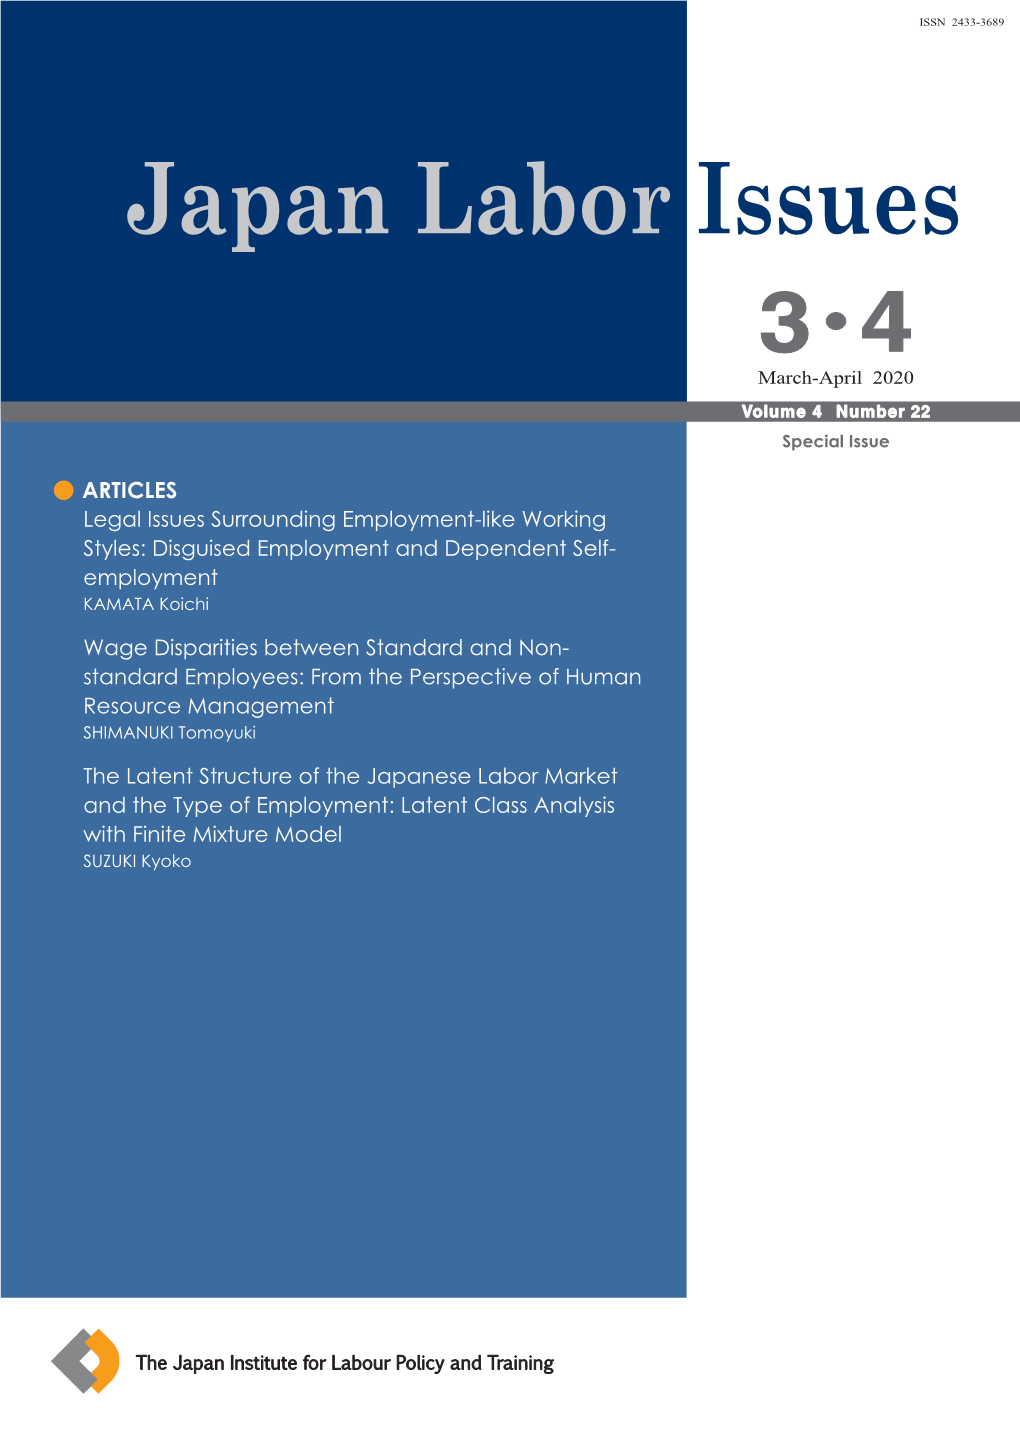 Japan Labor Issues Volume 4 Number 22, March-April 2020